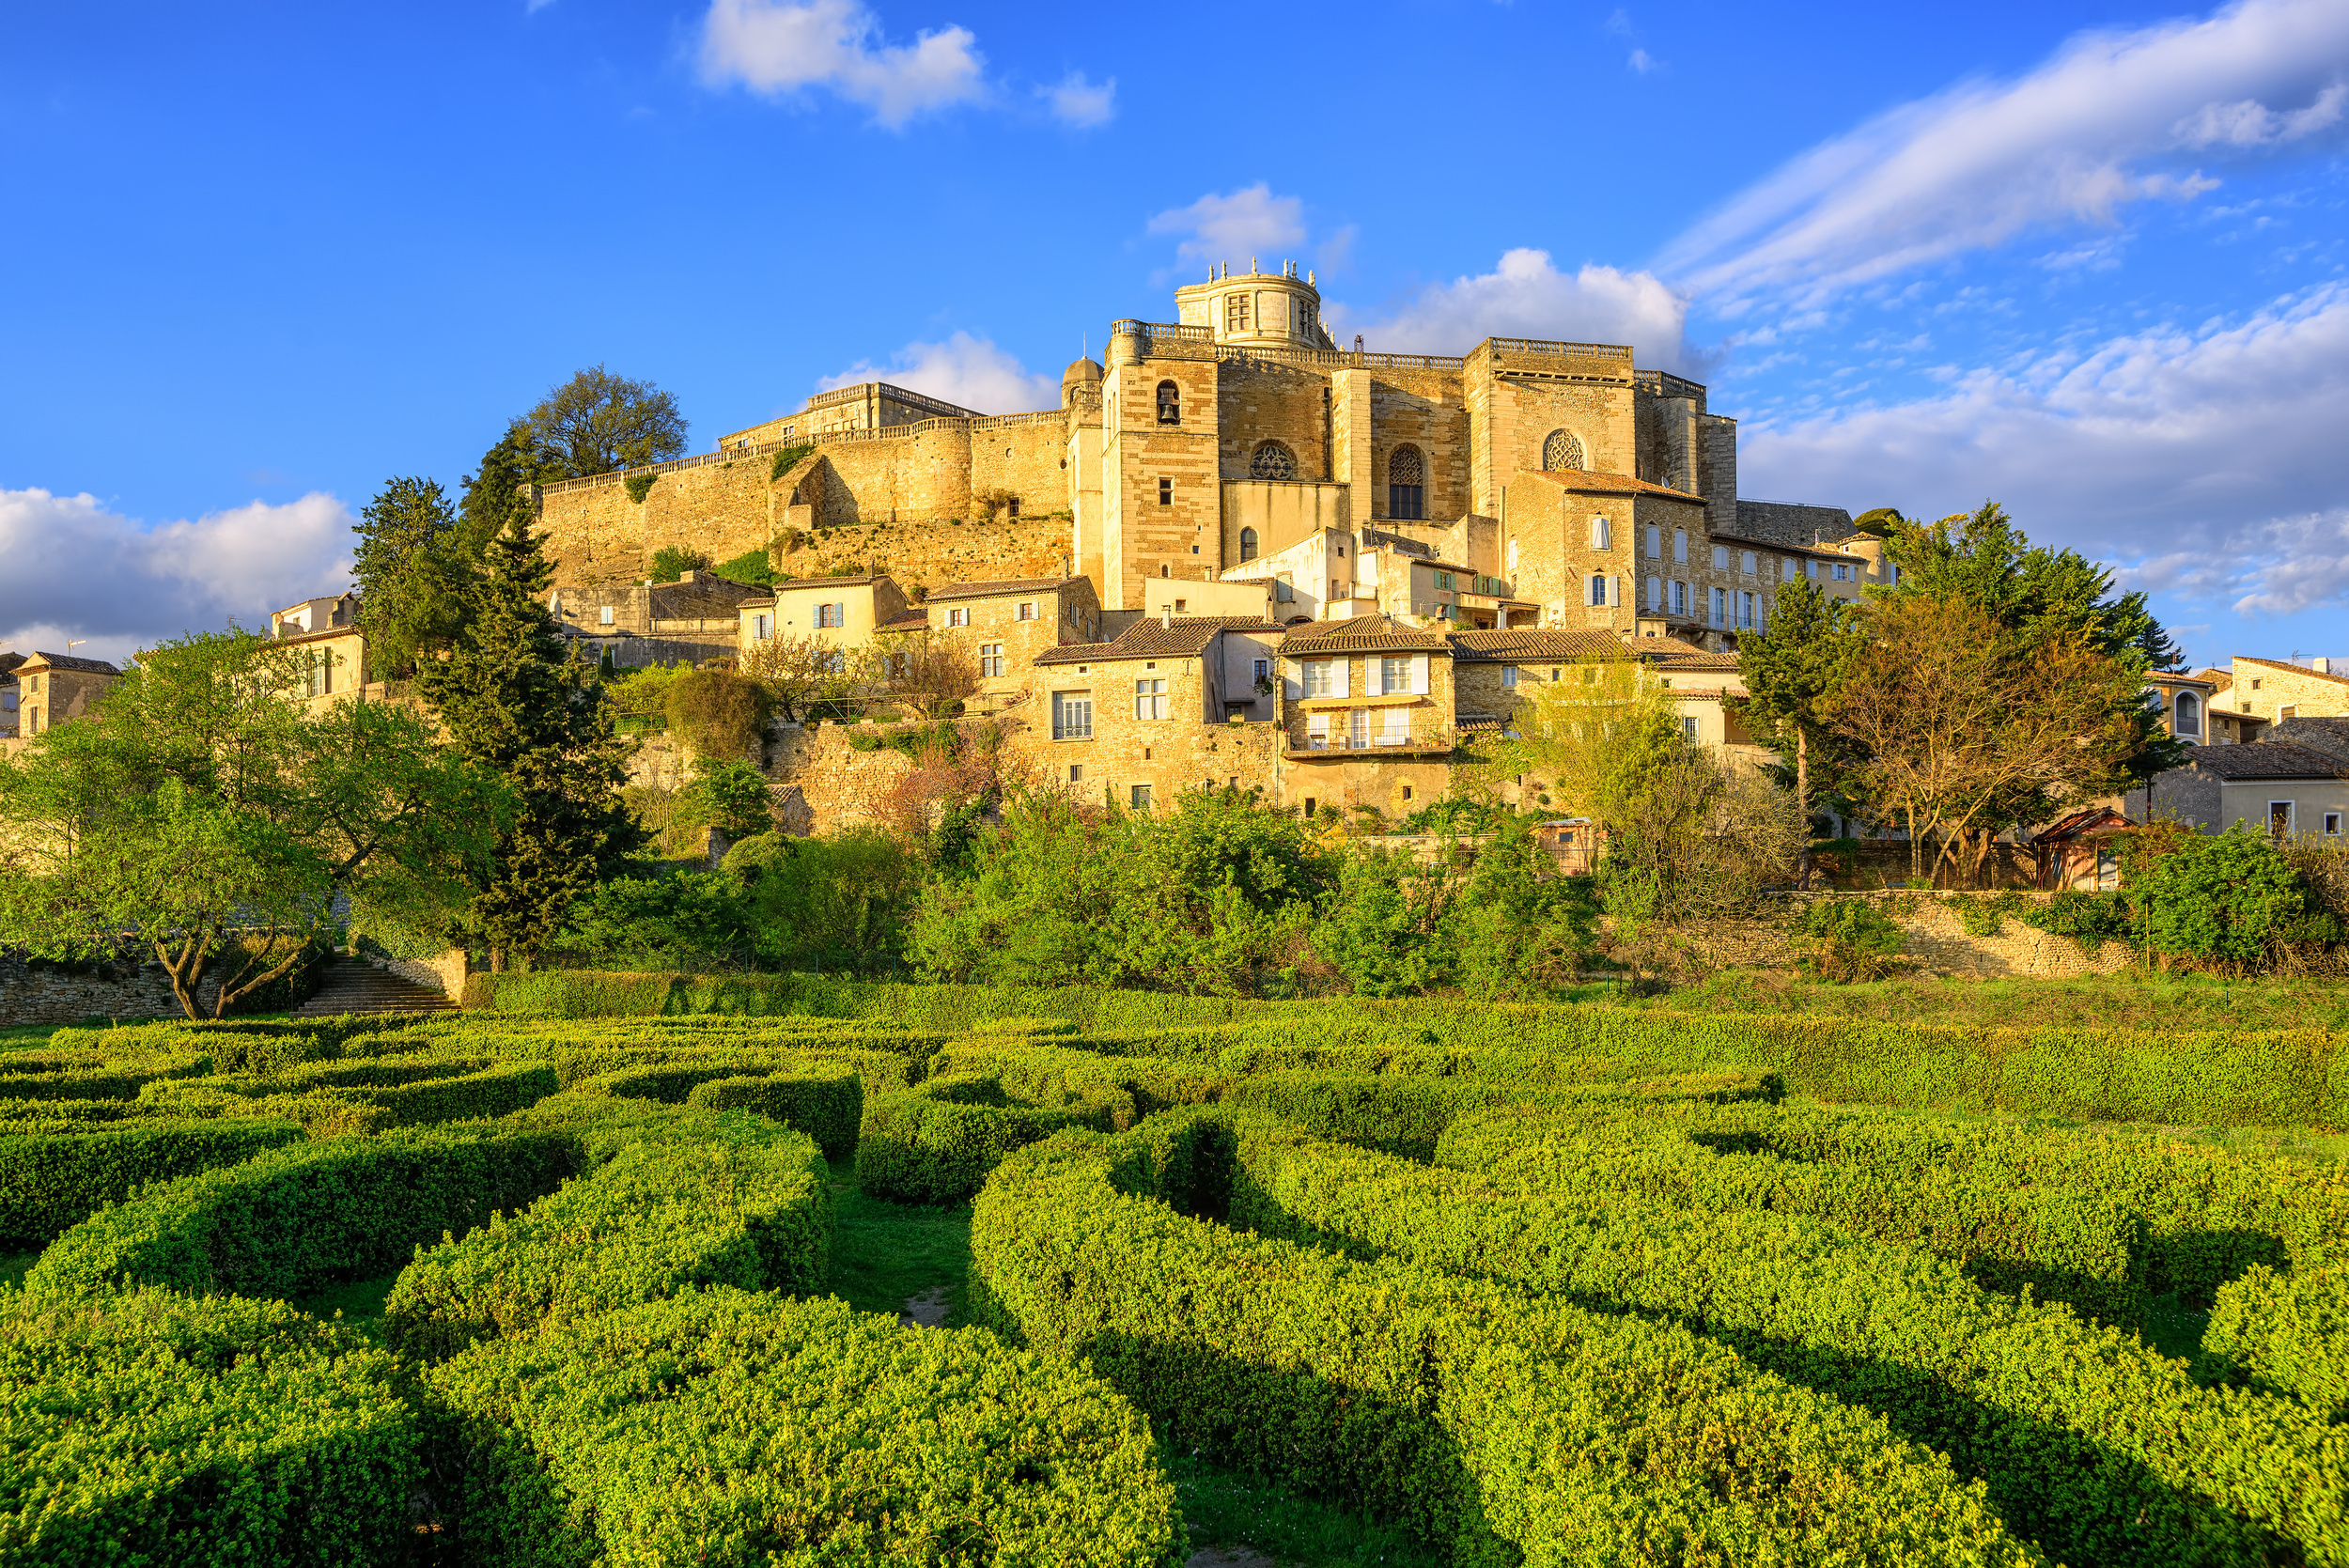 <p>In the Drôme department of inland Provence lies storybook-worthy Grignan. The hilltop town is perched above lavender fields and houses an impressive castle that once served as the residence for the Ademar family in the 12th century.</p><p><a href='https://www.msn.com/en-us/community/channel/vid-cj9pqbr0vn9in2b6ddcd8sfgpfq6x6utp44fssrv6mc2gtybw0us'>Follow us on MSN to see more of our exclusive lifestyle content.</a></p>